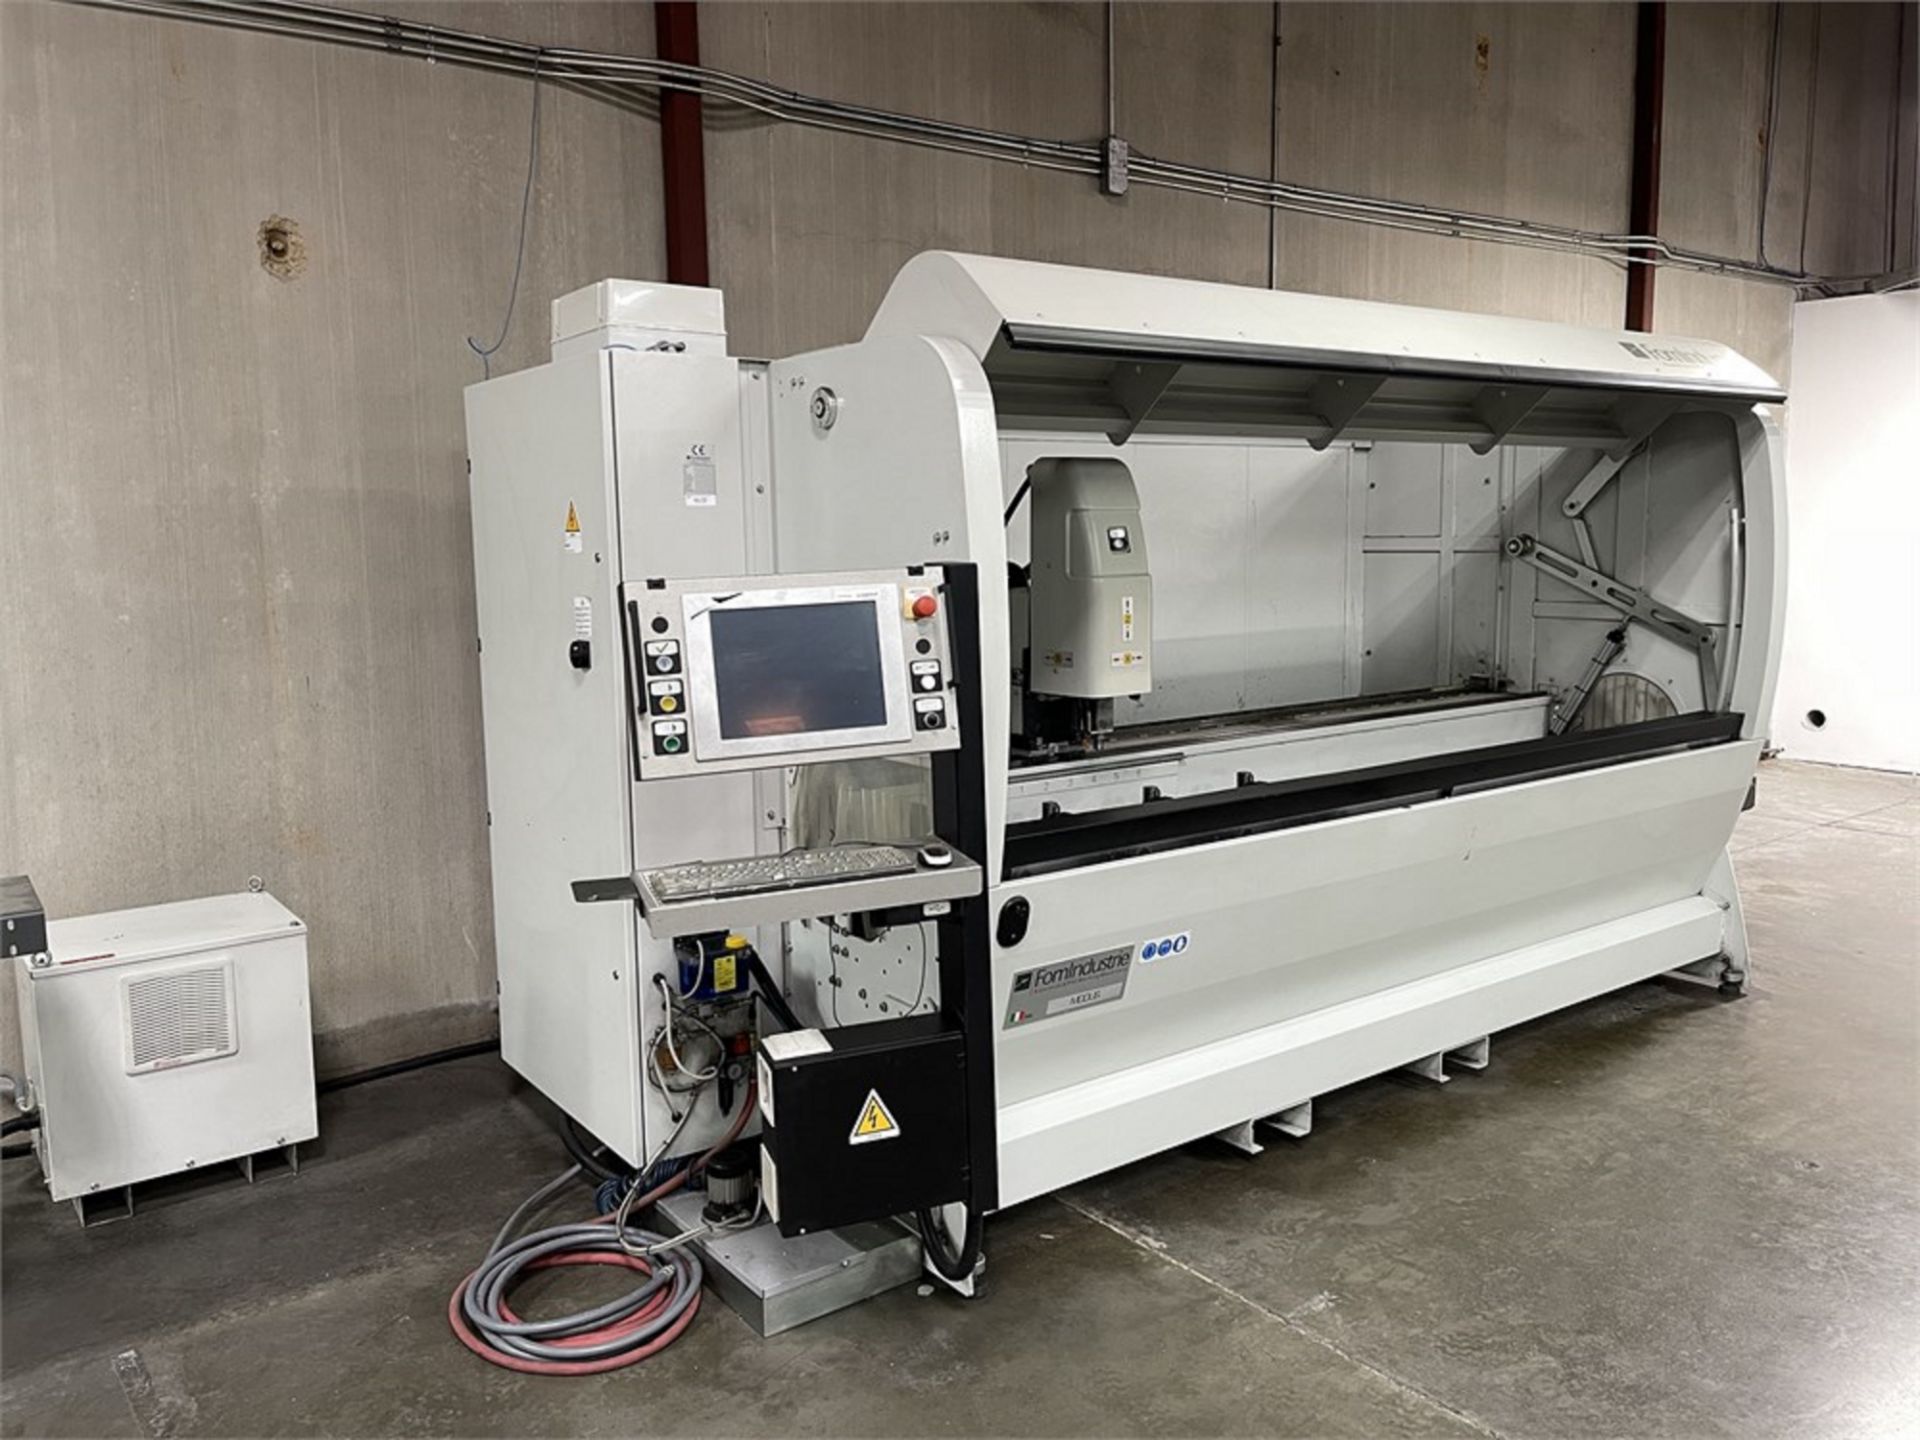 10' FOM INDUSTRIE MODEL MODUS CNC 4-AXIS ALUMINUM PROFILE MACHINING CENTER/ROUTER, S/N A0700194 - Image 2 of 14